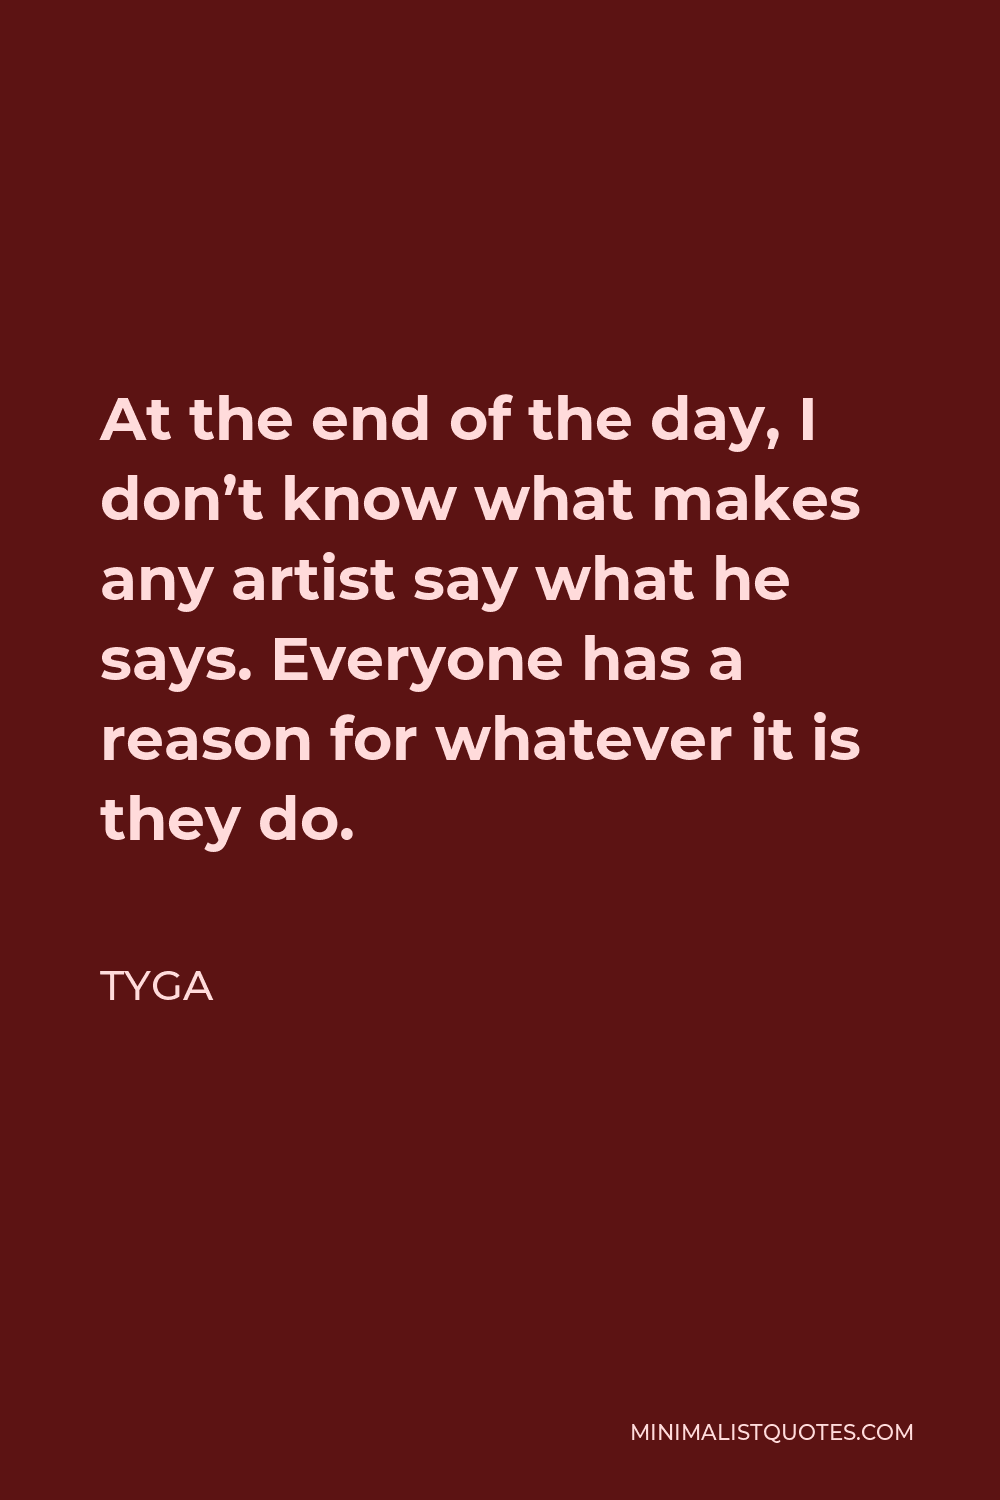 Tyga Quote - At the end of the day, I don’t know what makes any artist say what he says. Everyone has a reason for whatever it is they do.